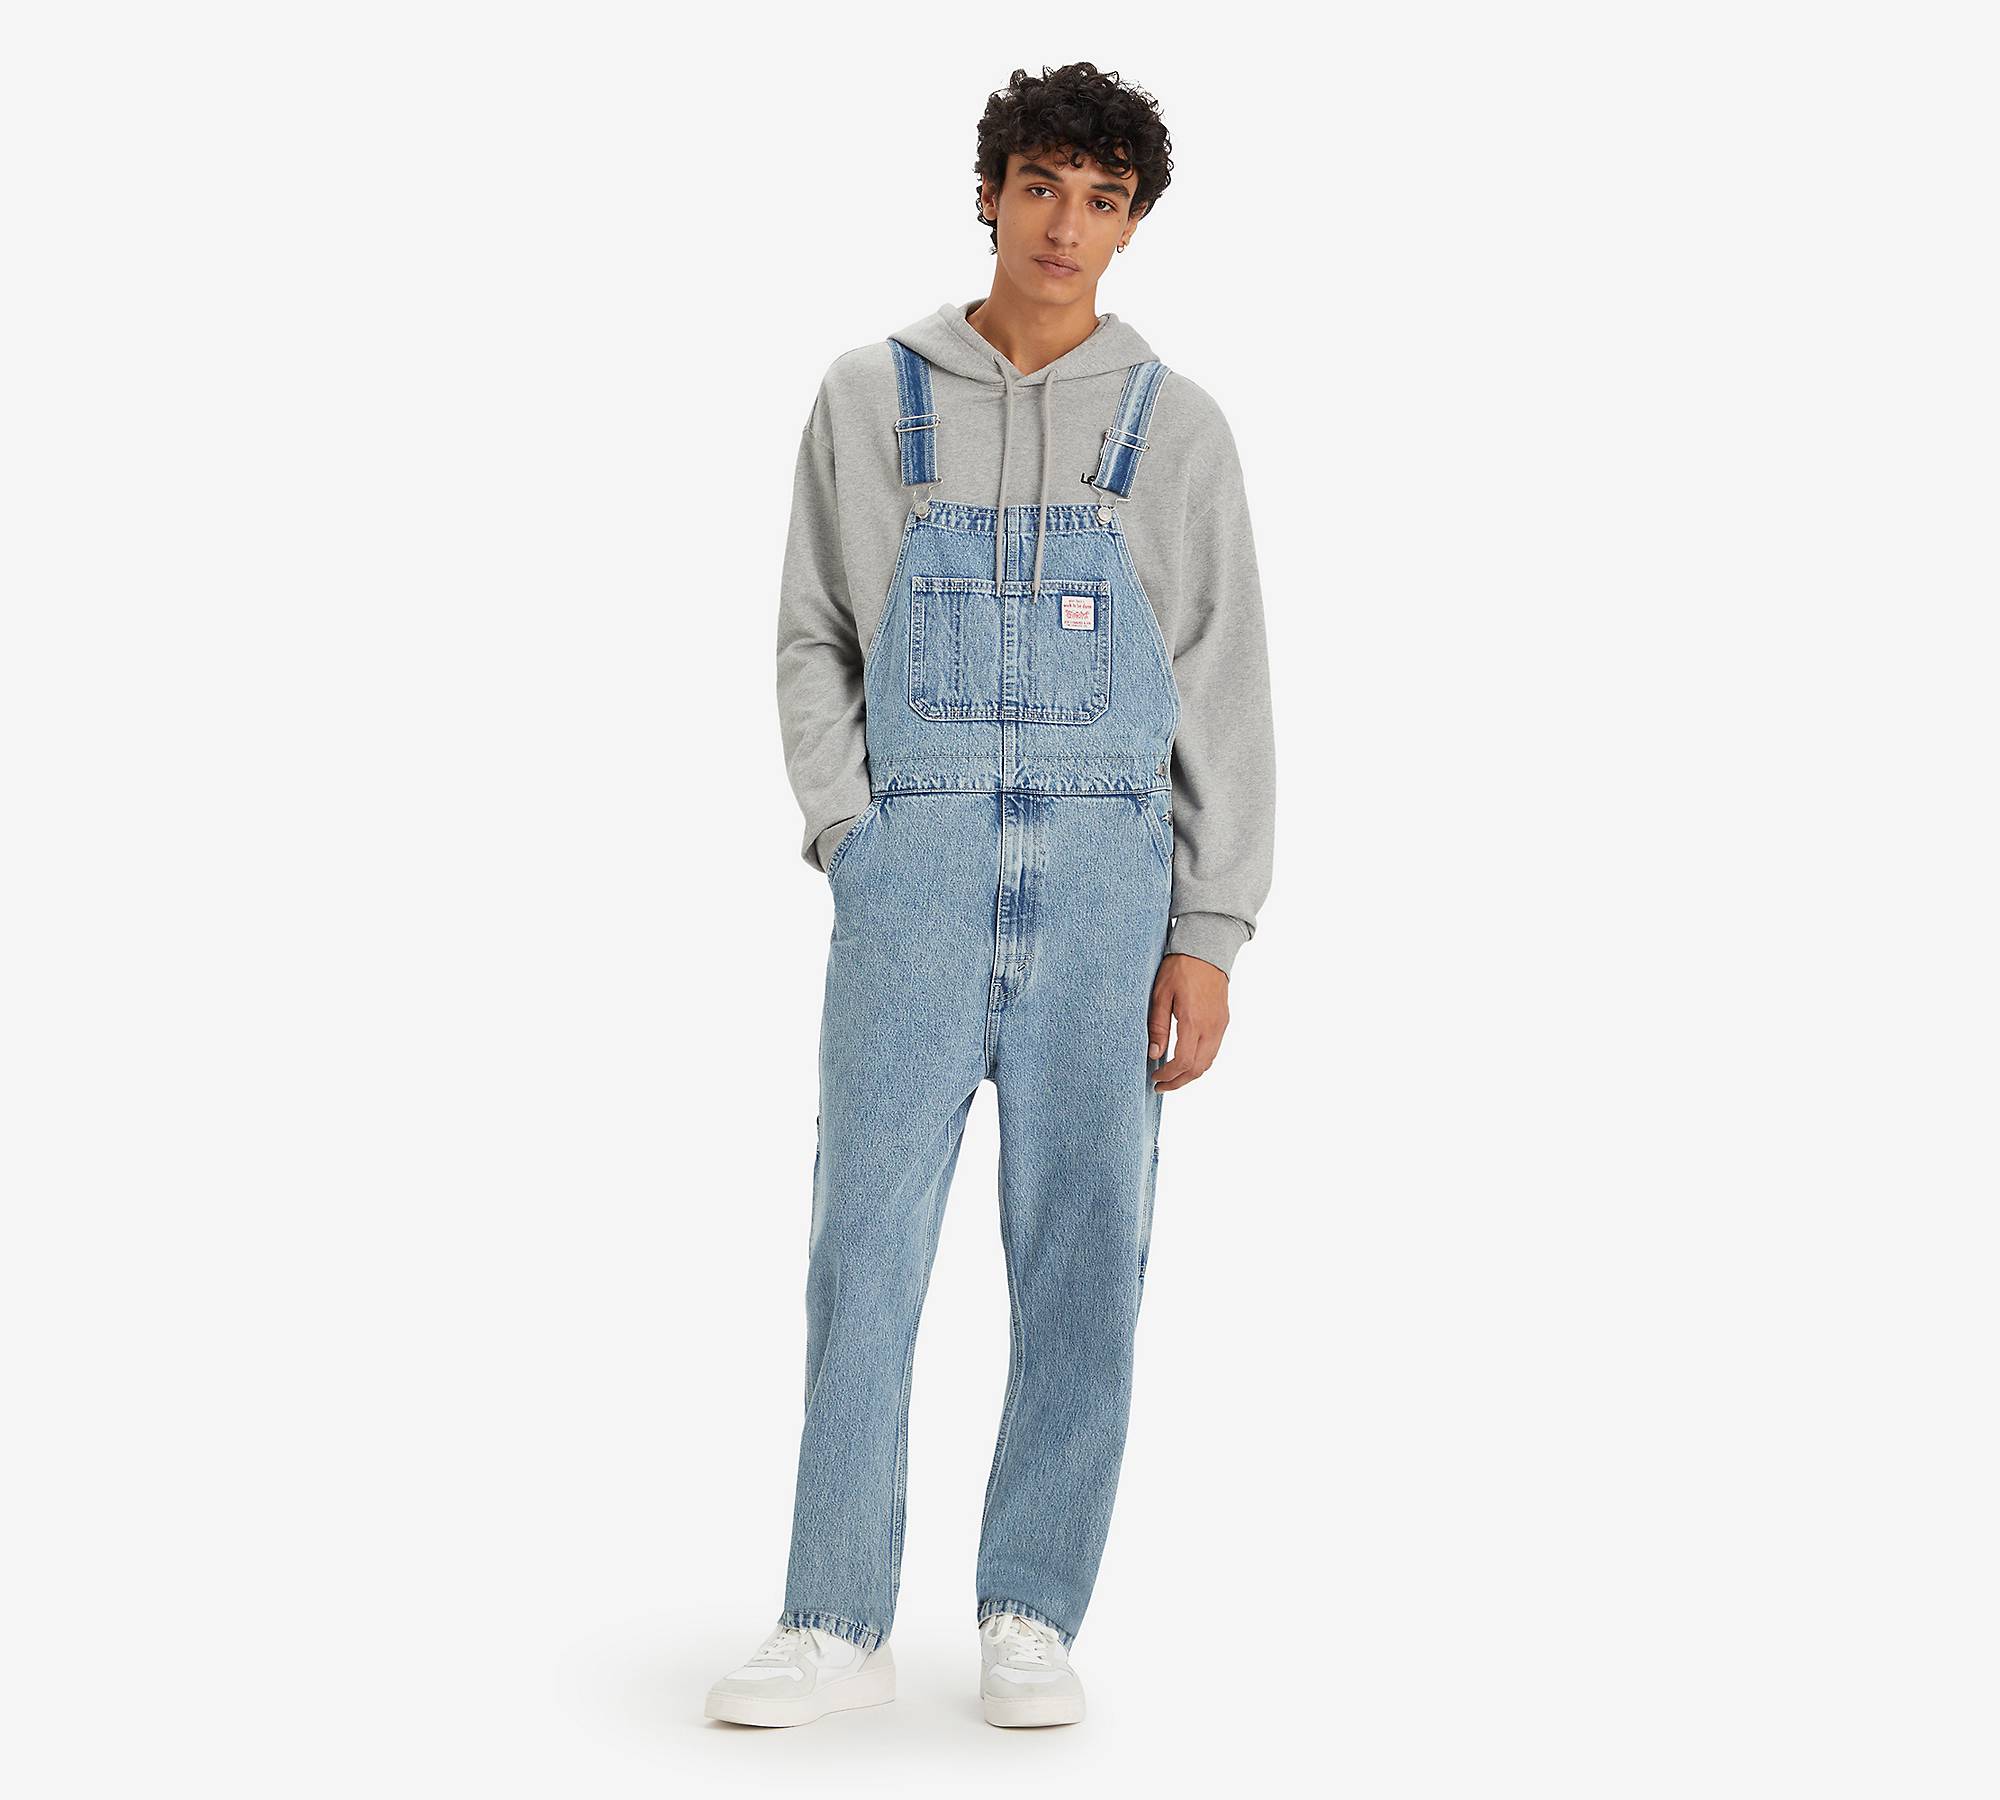 Red Tab™ Men's Overalls 1